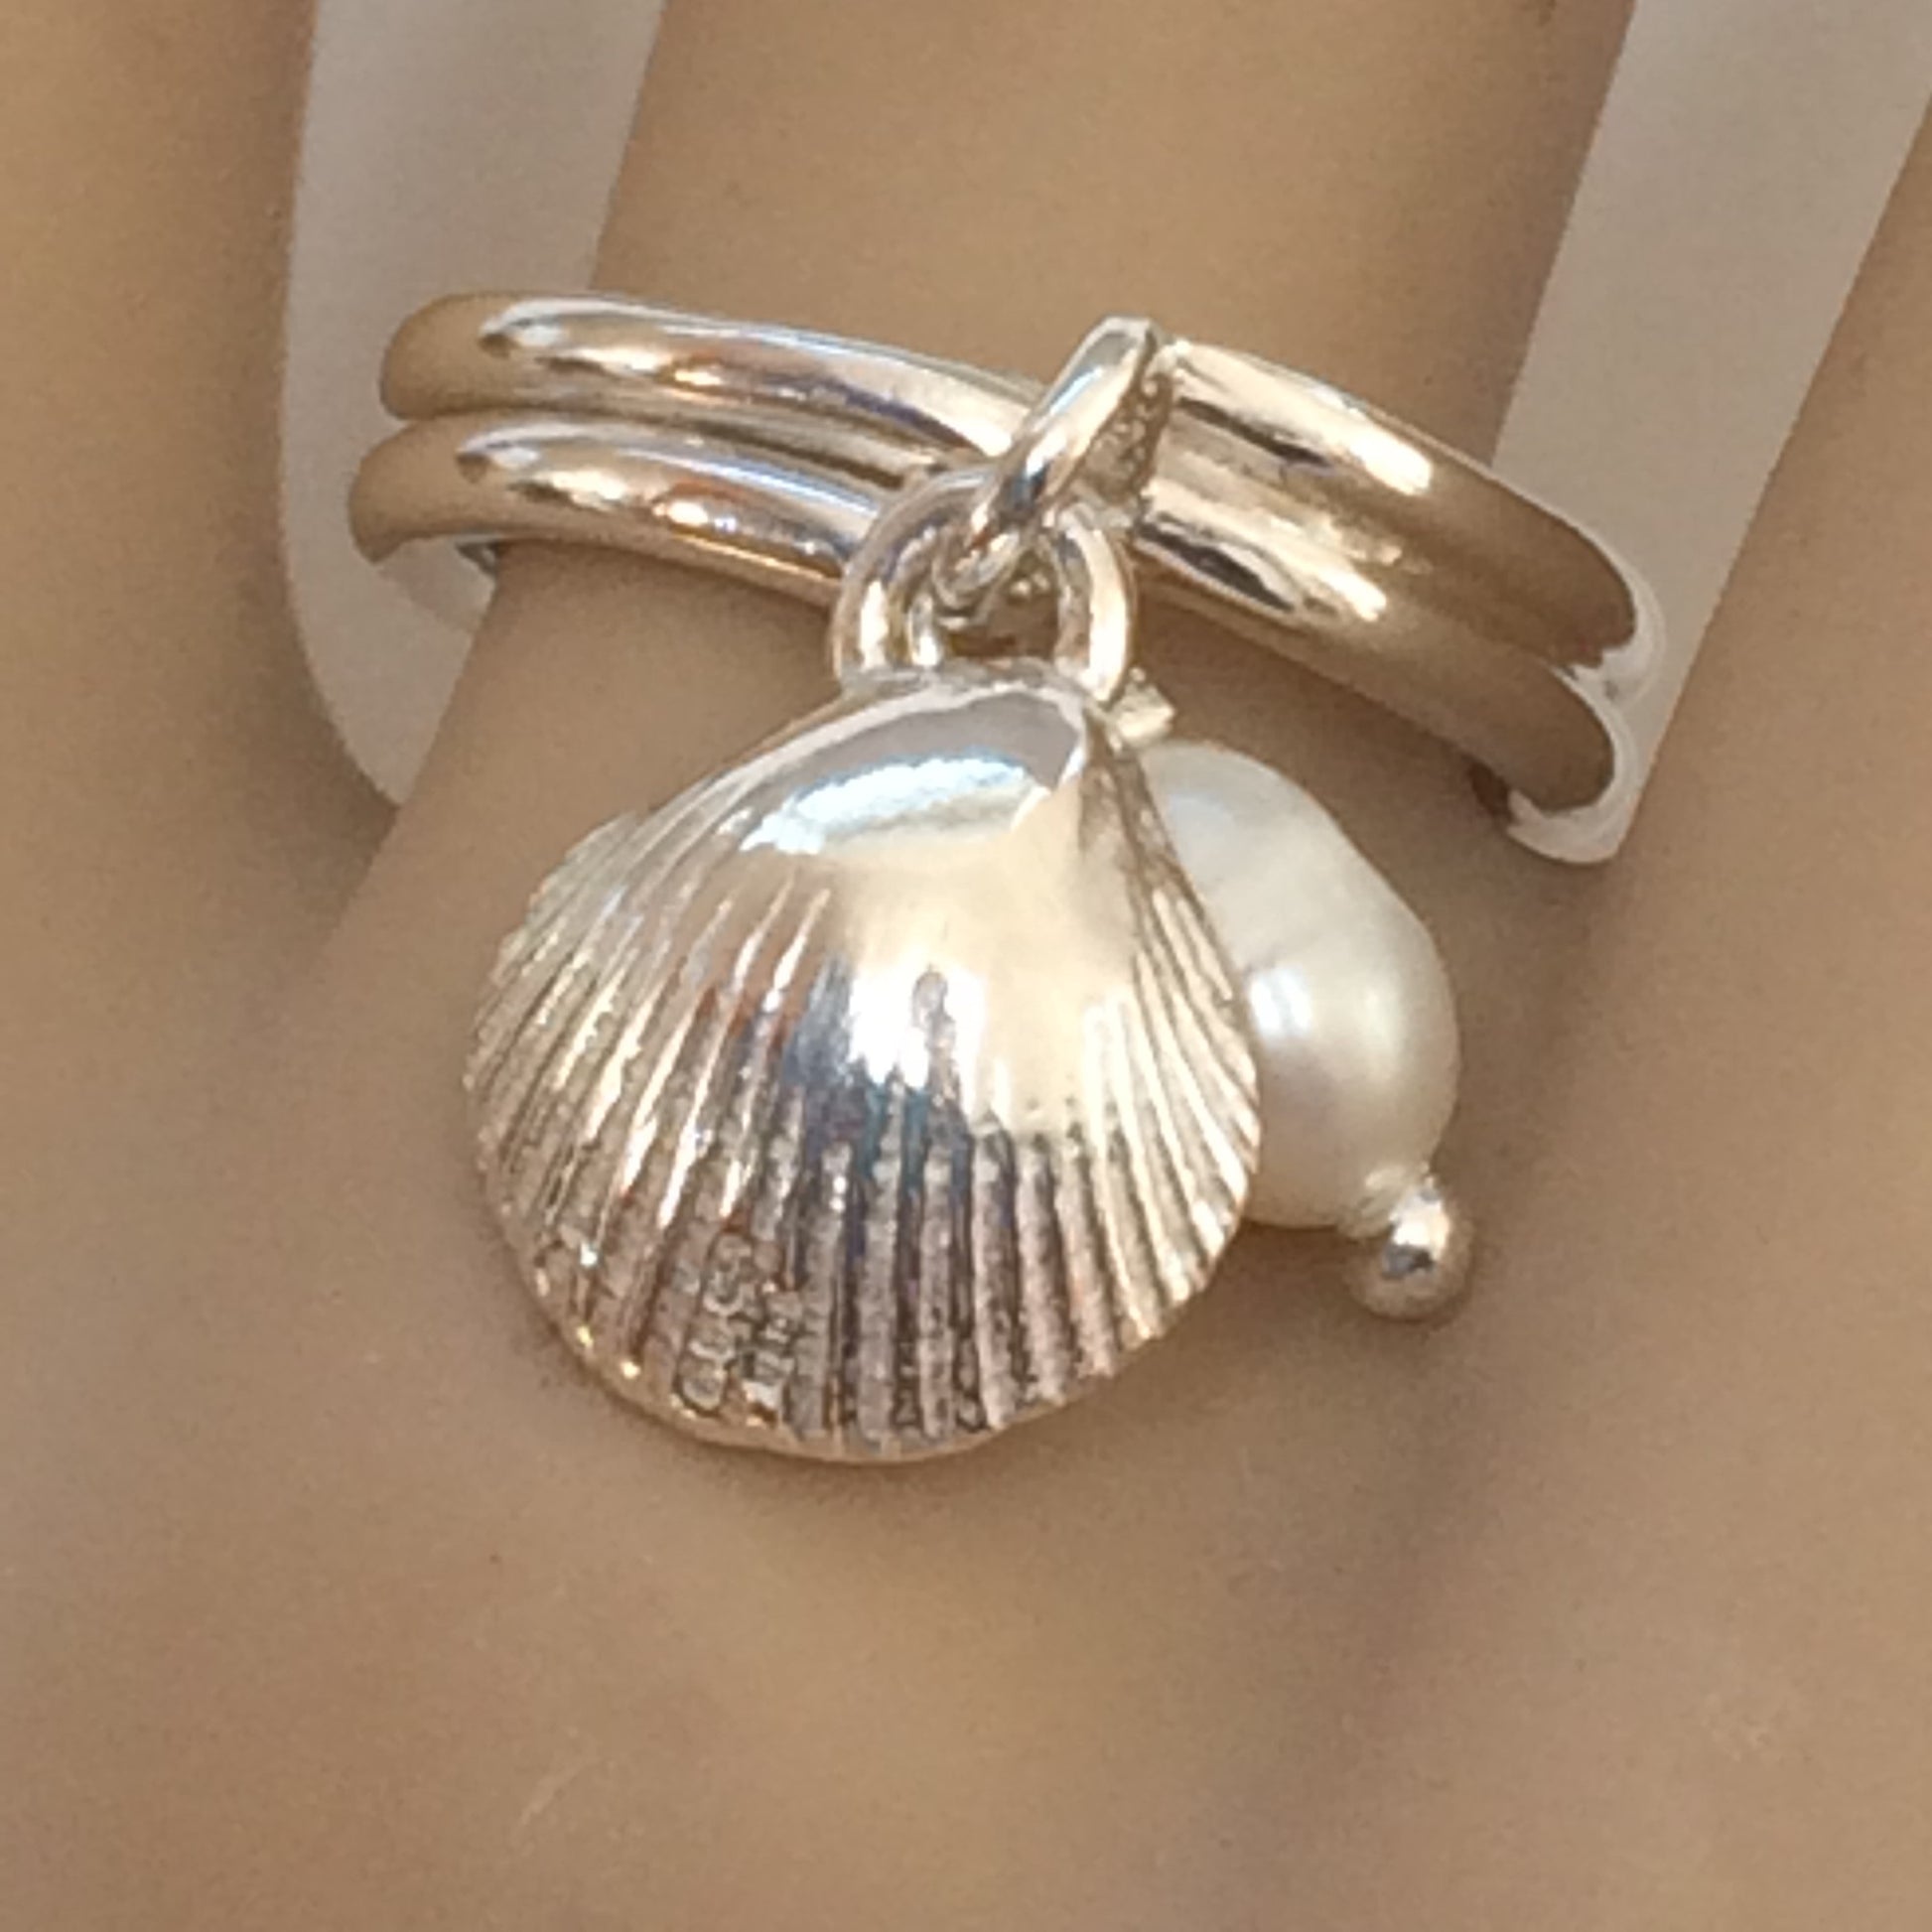 Cockle and pearl charm ring